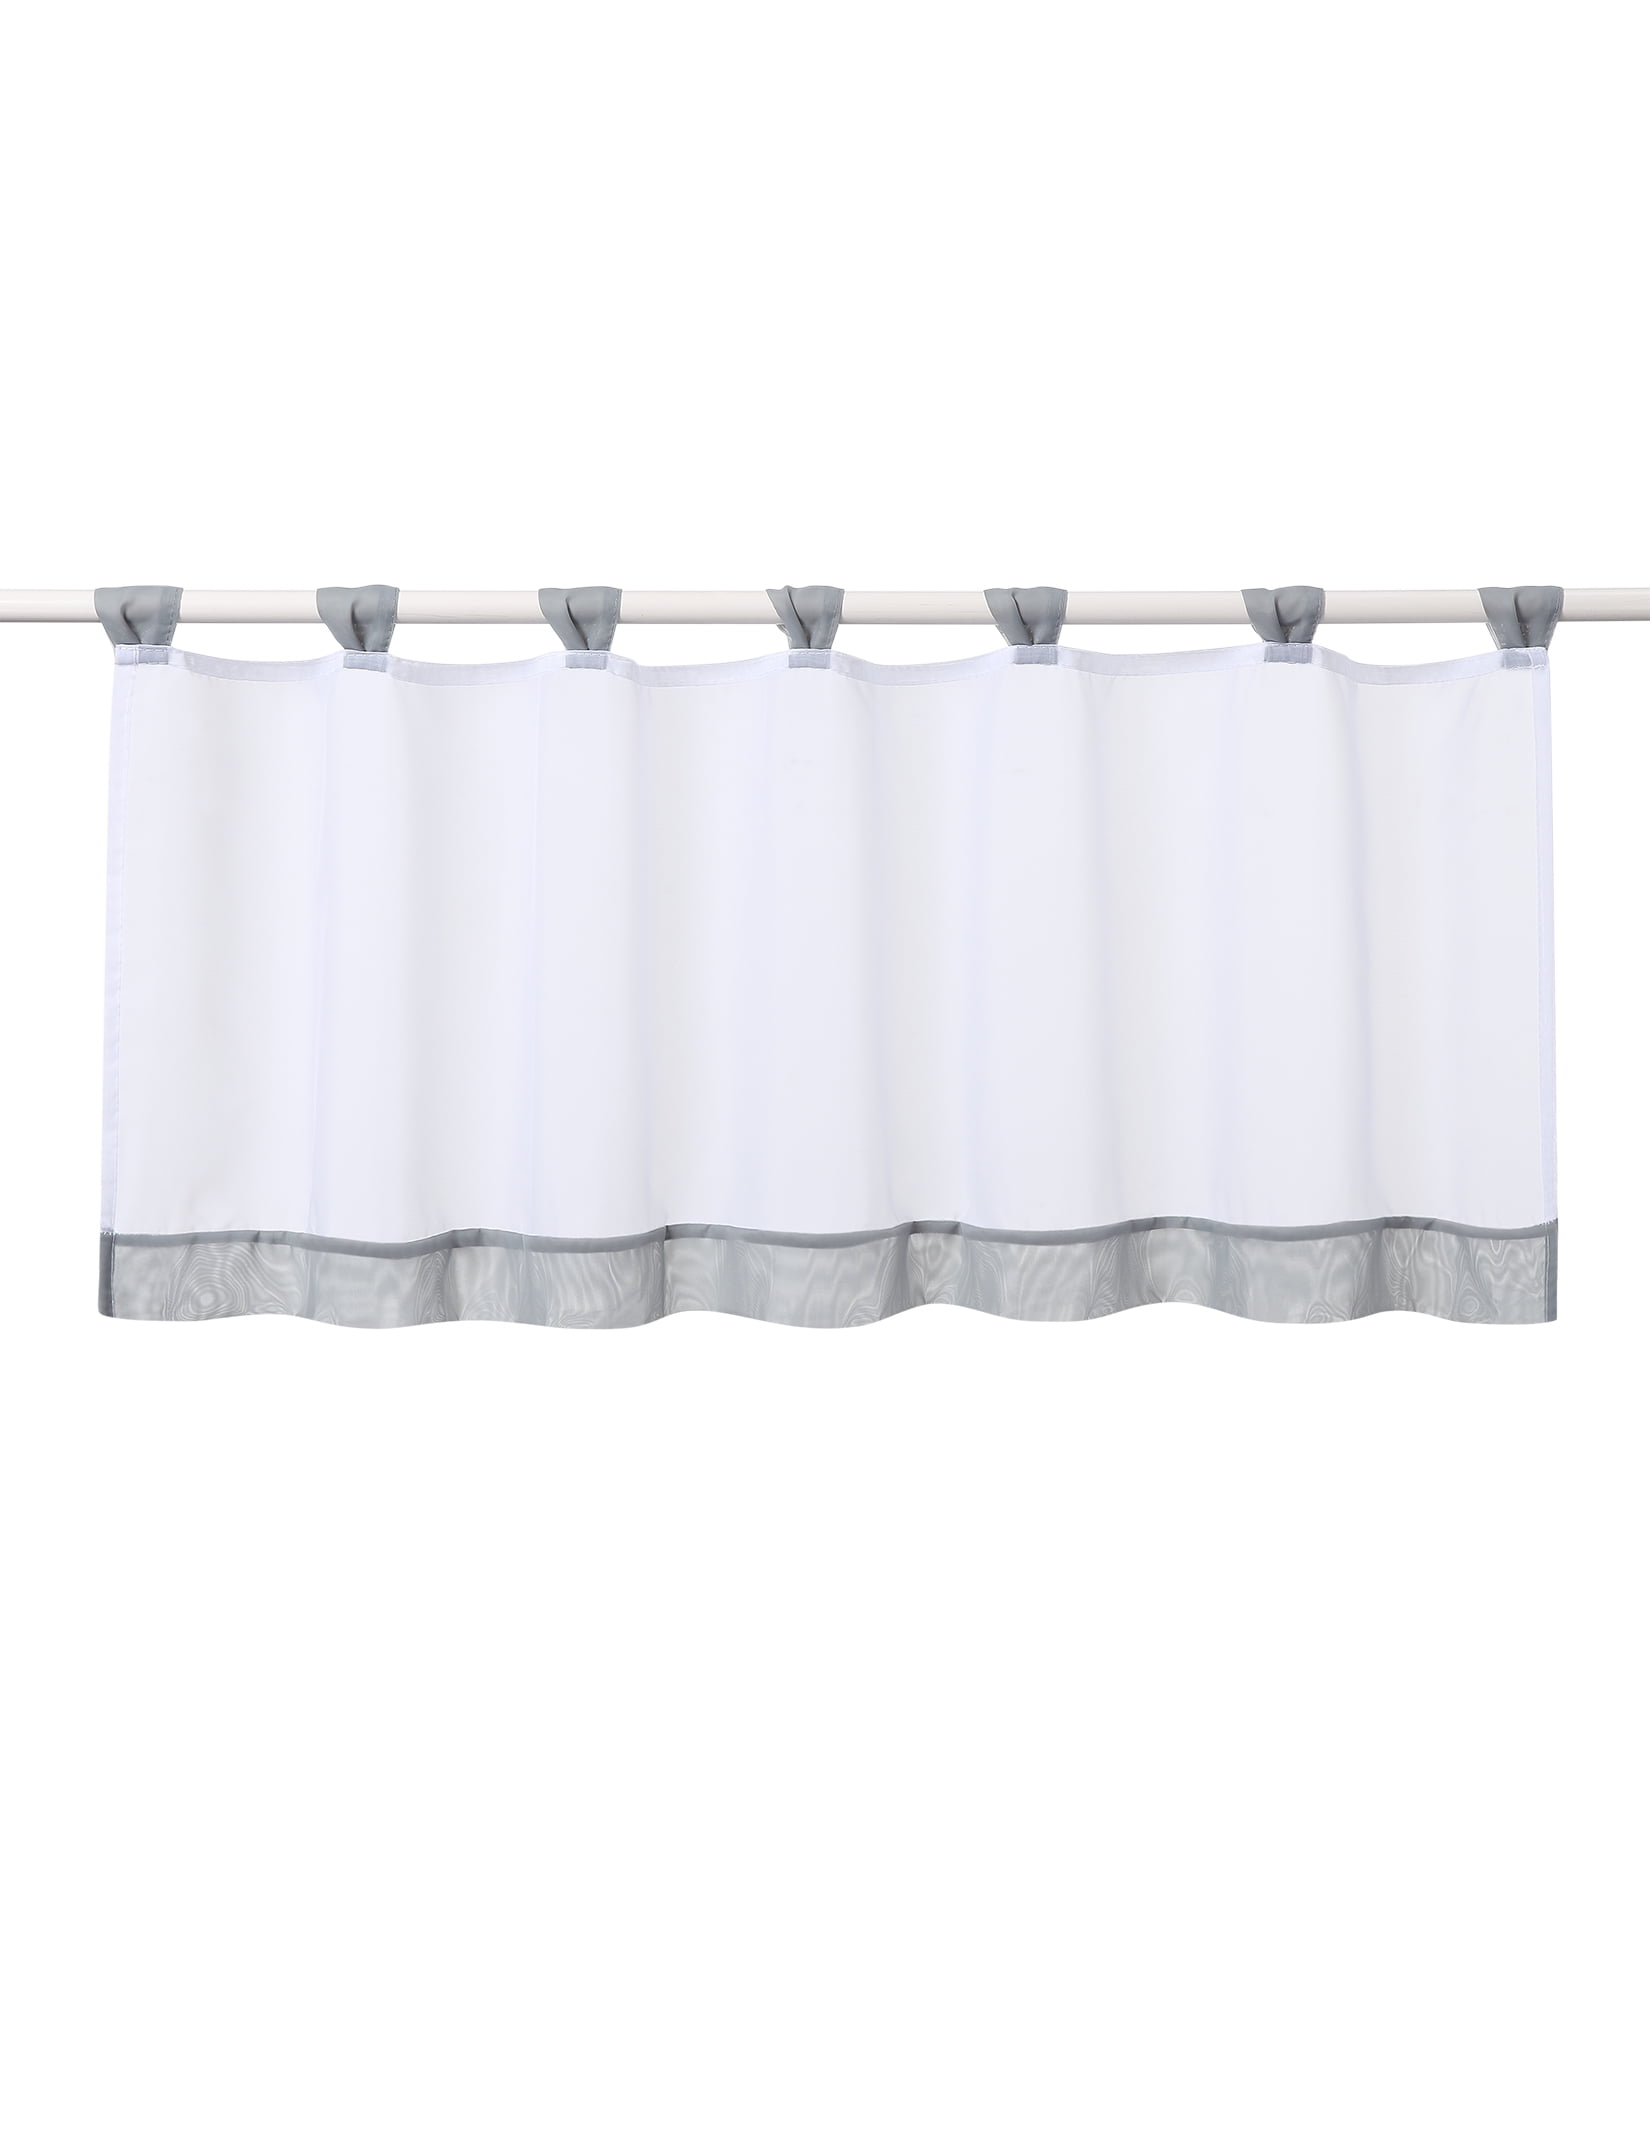 Lintimes Kitchen Curtains Small Curtains Semi Transparent Voile Curtains Cafe 